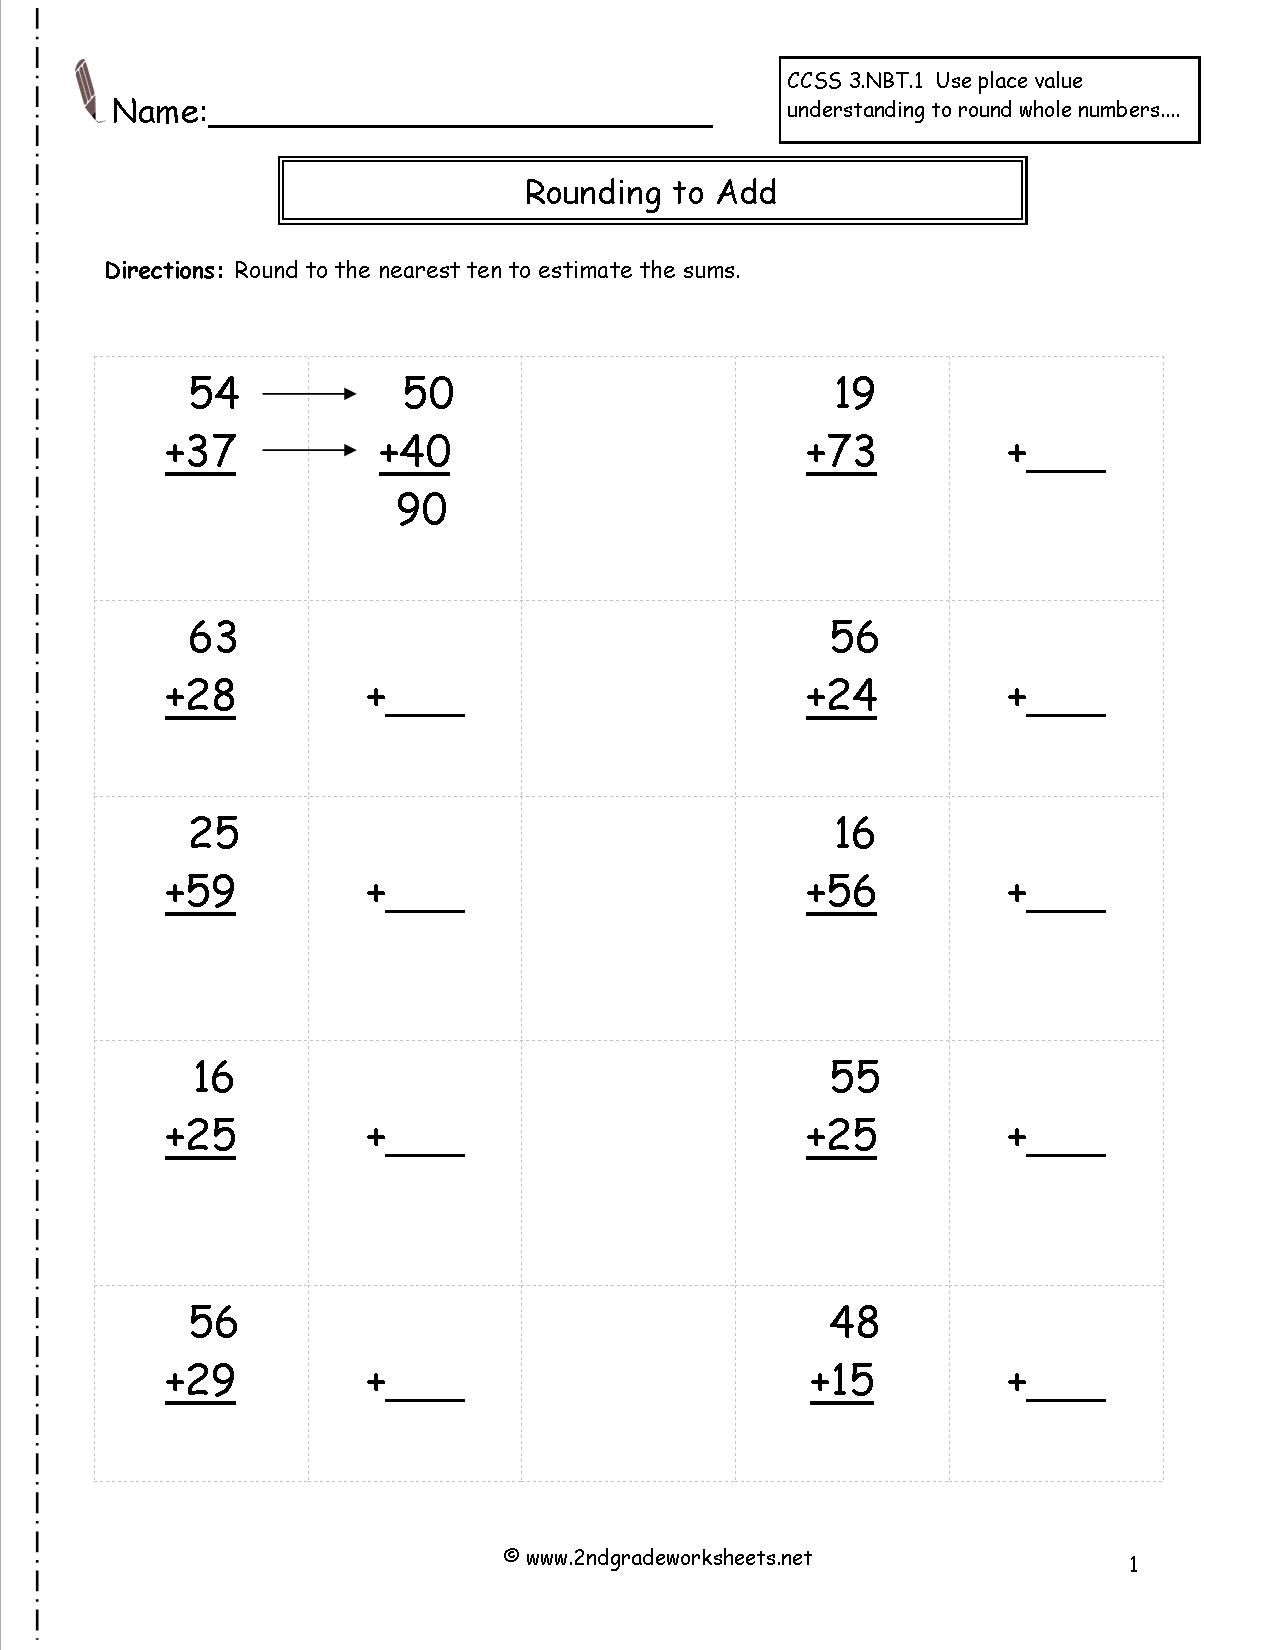 Estimating Sums and Differences Worksheet Image